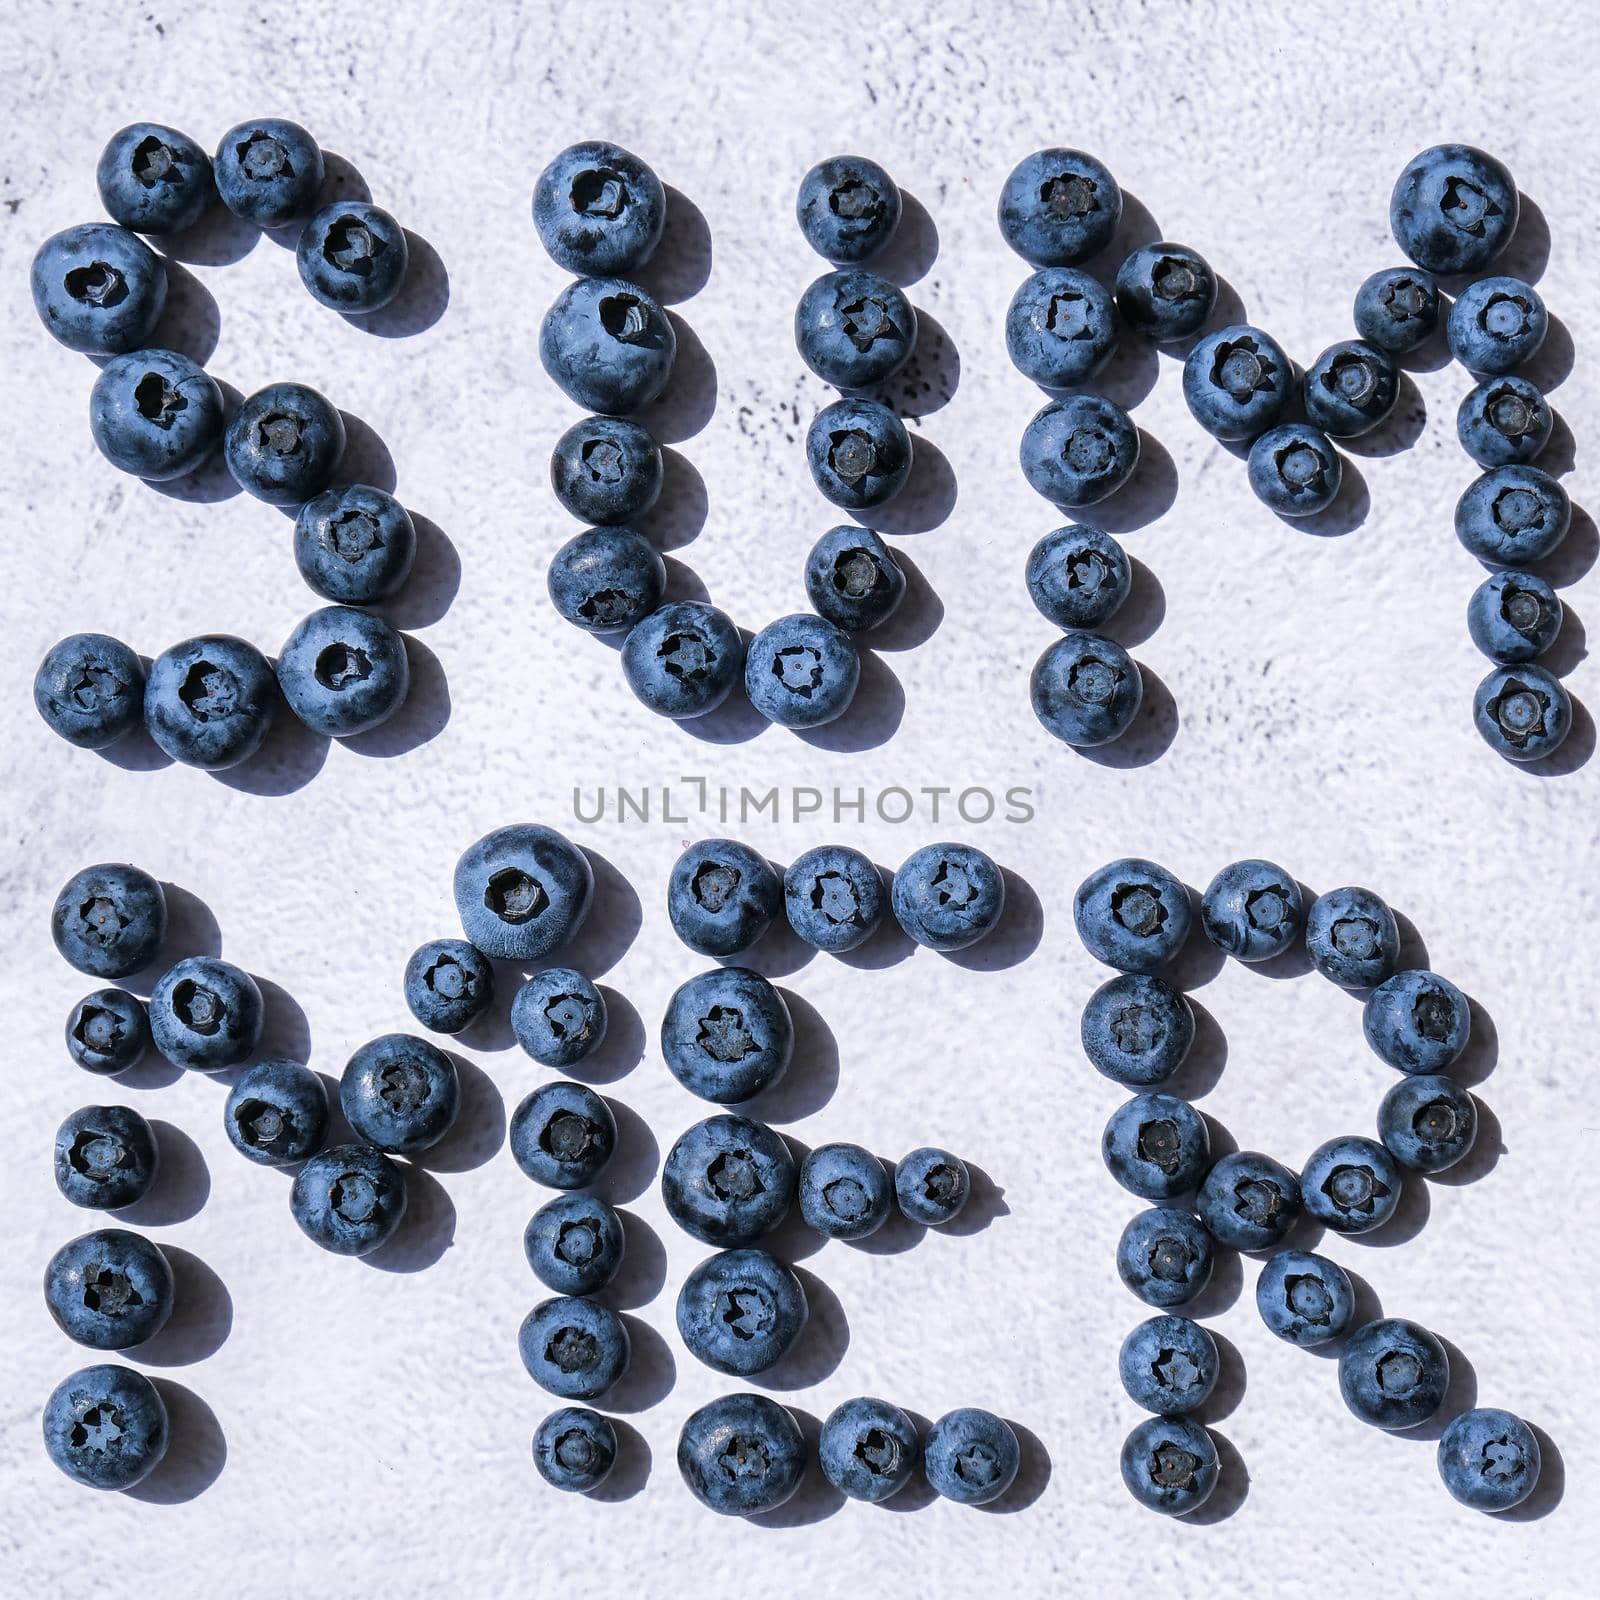 Summer inscription lined from blueberries. Fruits and berries, vegetarian and healthy eating concept. Summer text created from blueberries. Superfood by anna_stasiia